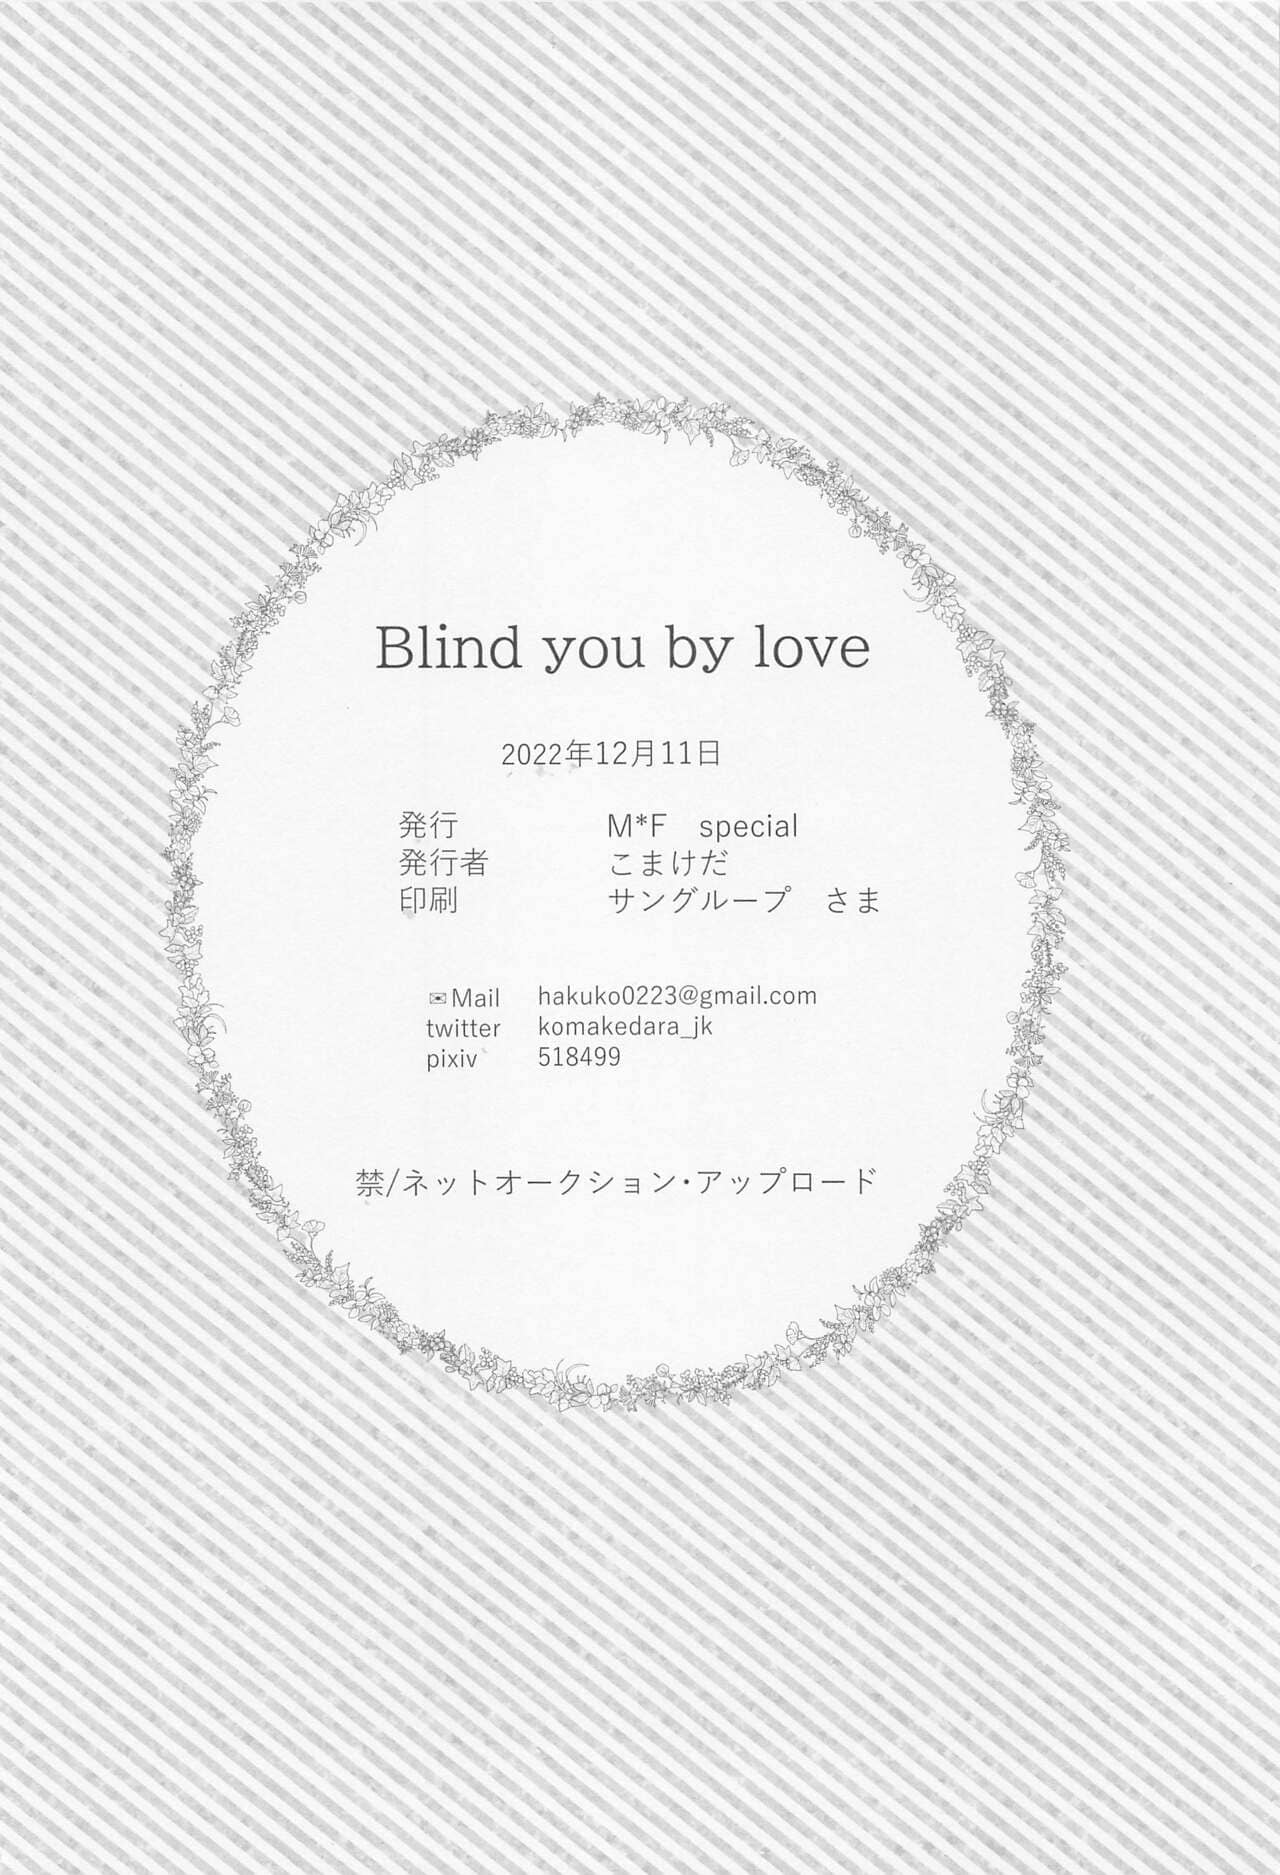 Blind you by love